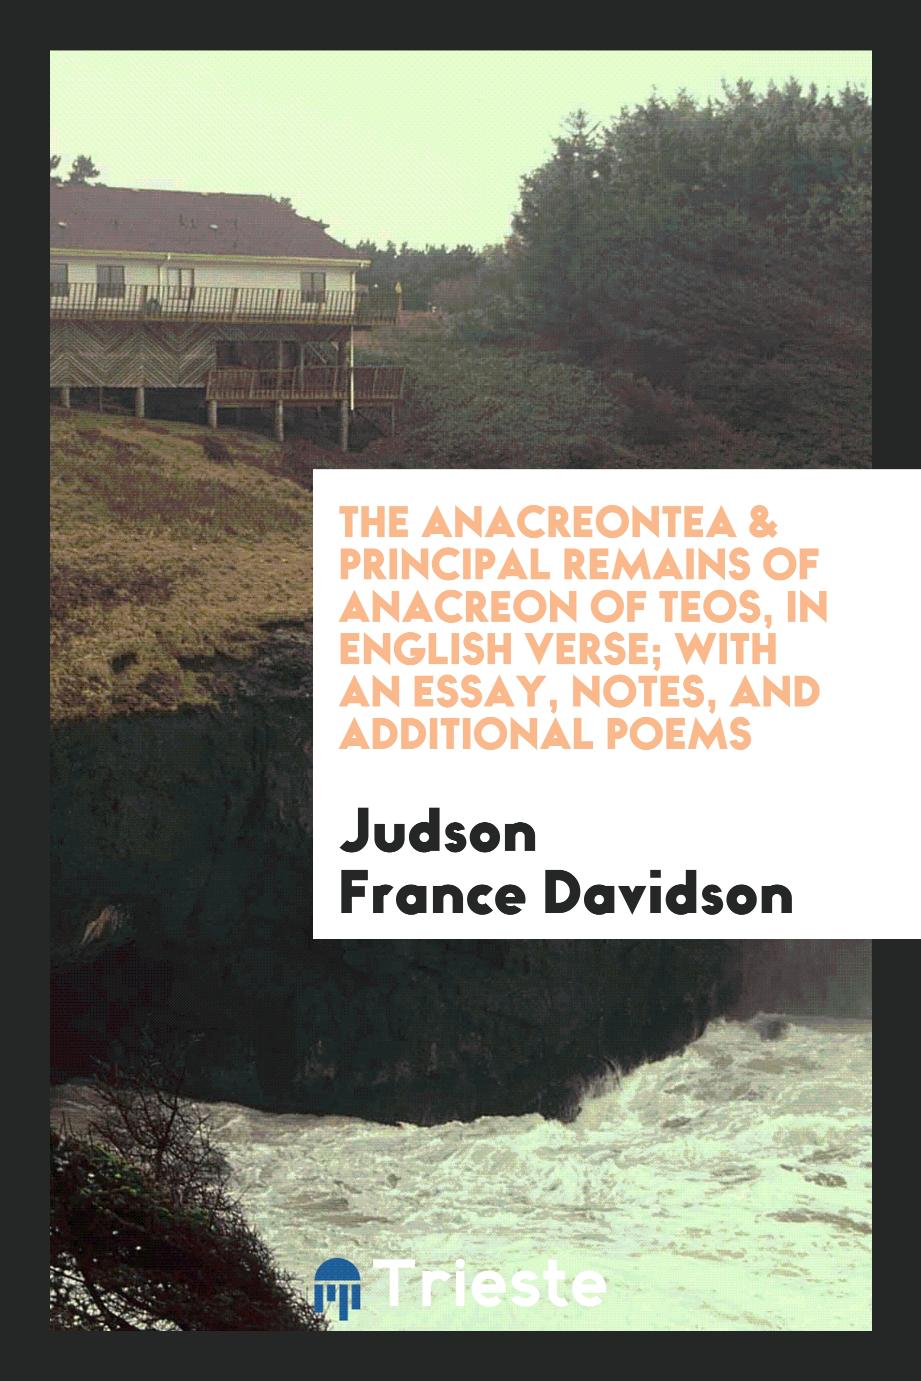 The Anacreontea & principal remains of Anacreon of Teos, in english verse; with an essay, notes, and additional poems